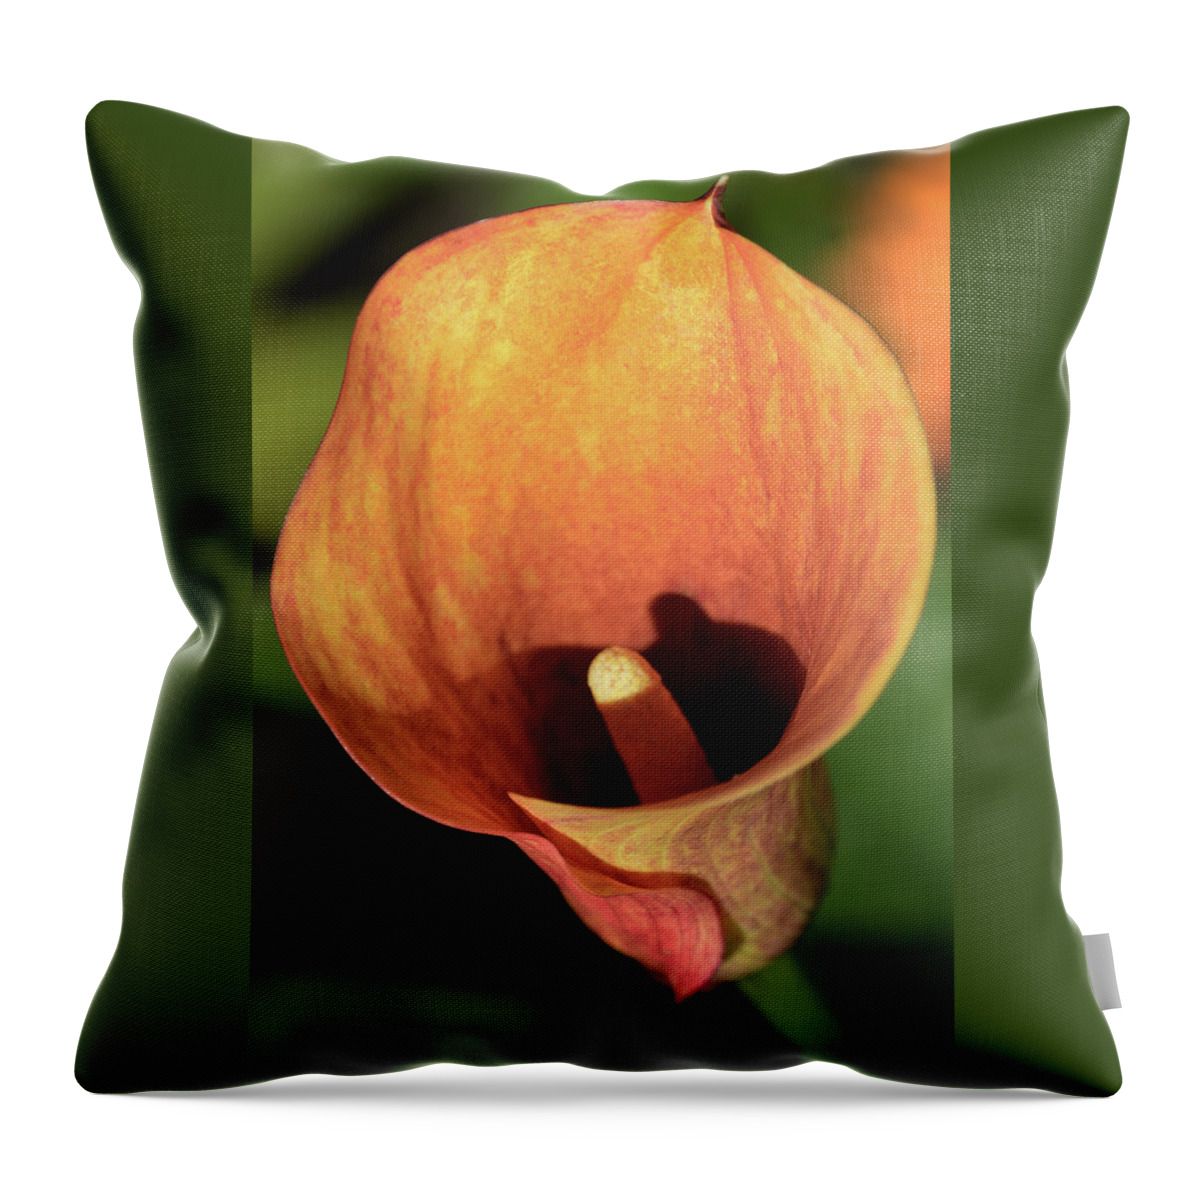 Calla Lily Throw Pillow featuring the photograph Calla Sunbathing. by Terence Davis